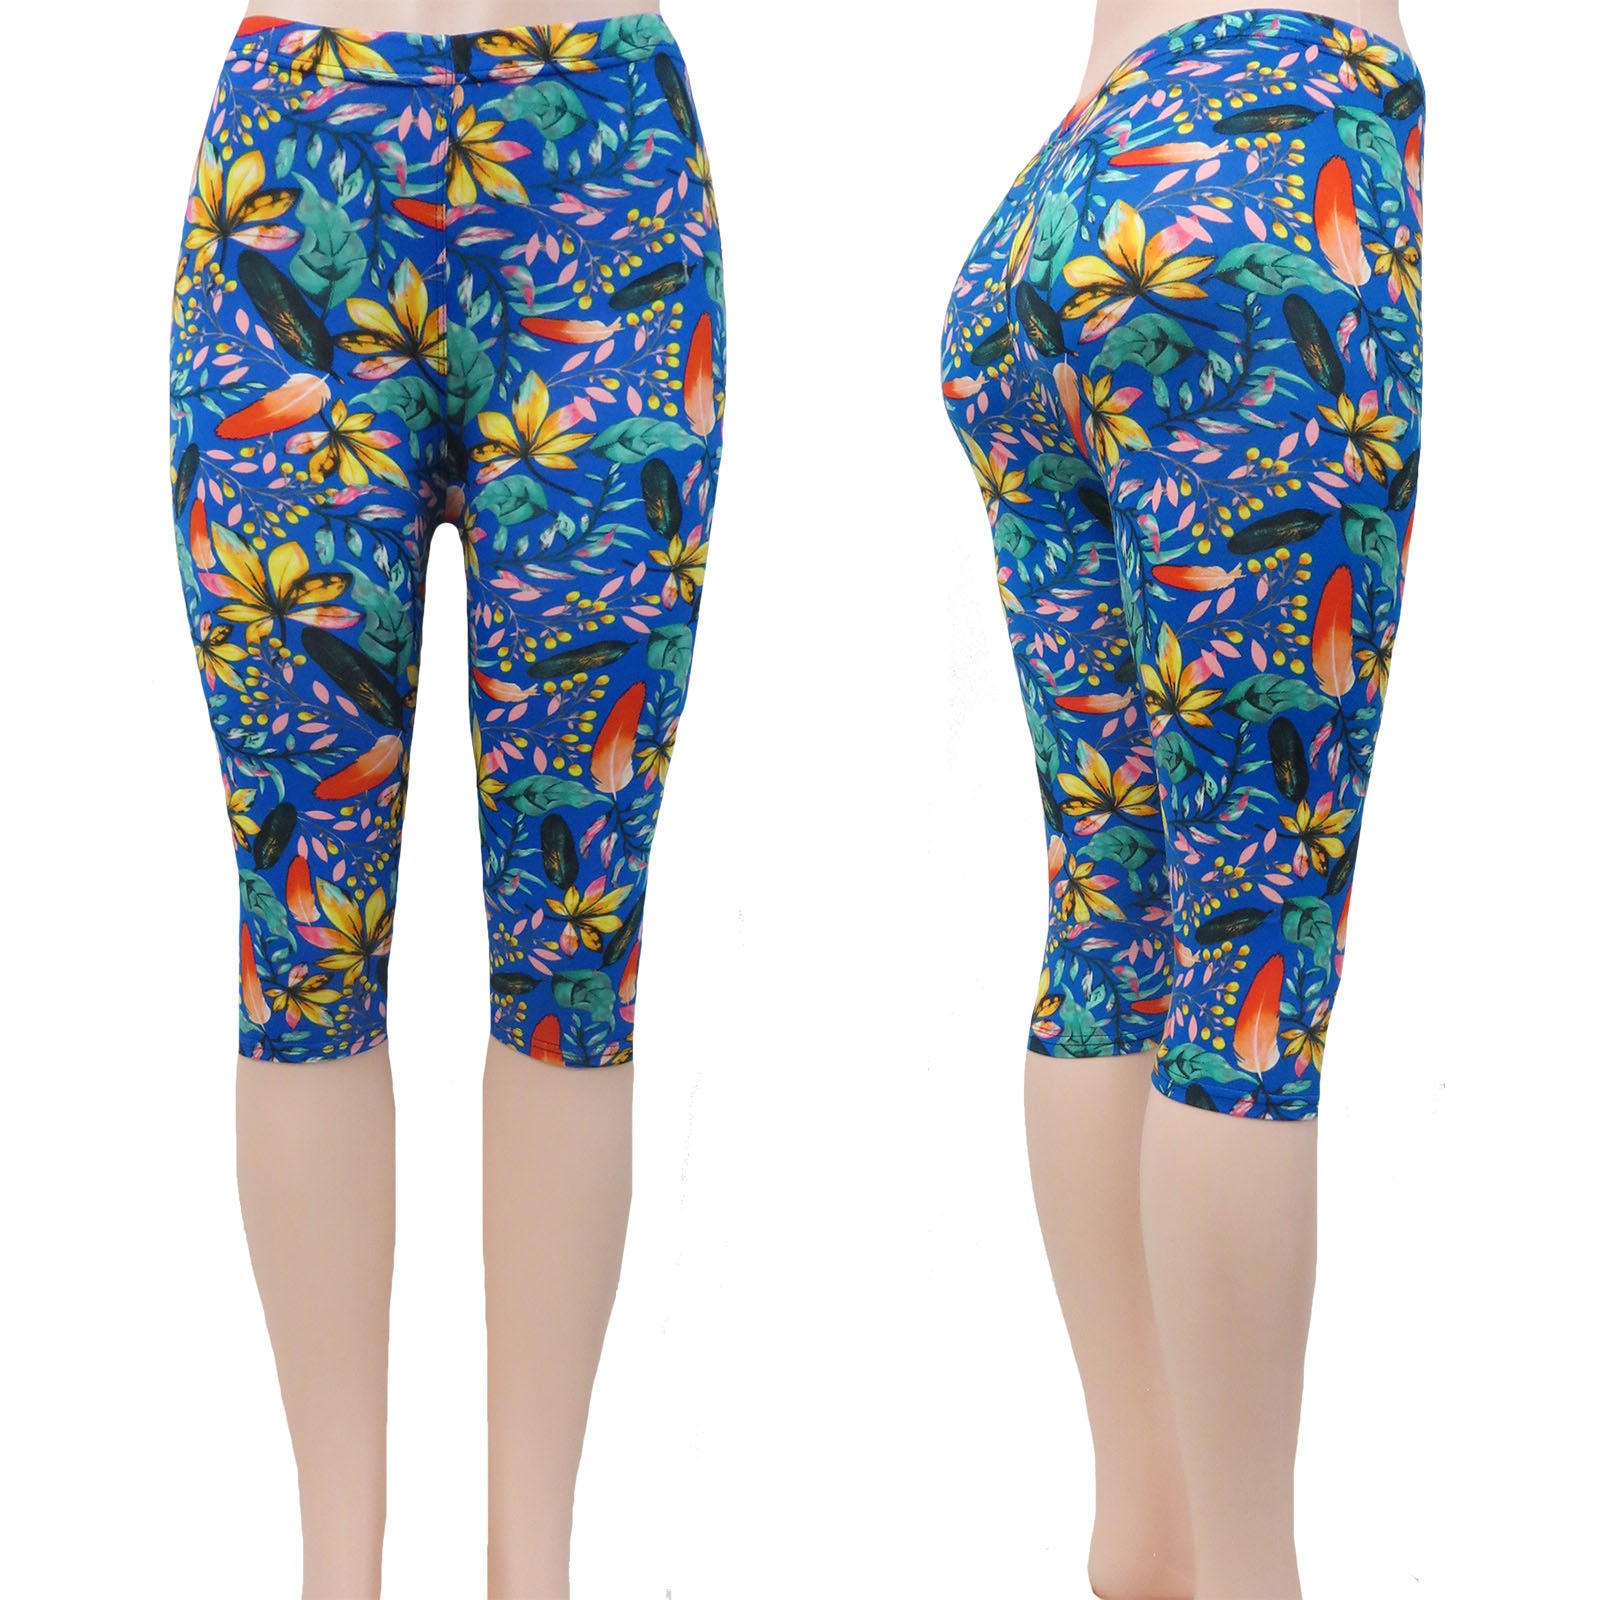 7/8 Length Leggings Manufacturer Wholesale in China - NDH